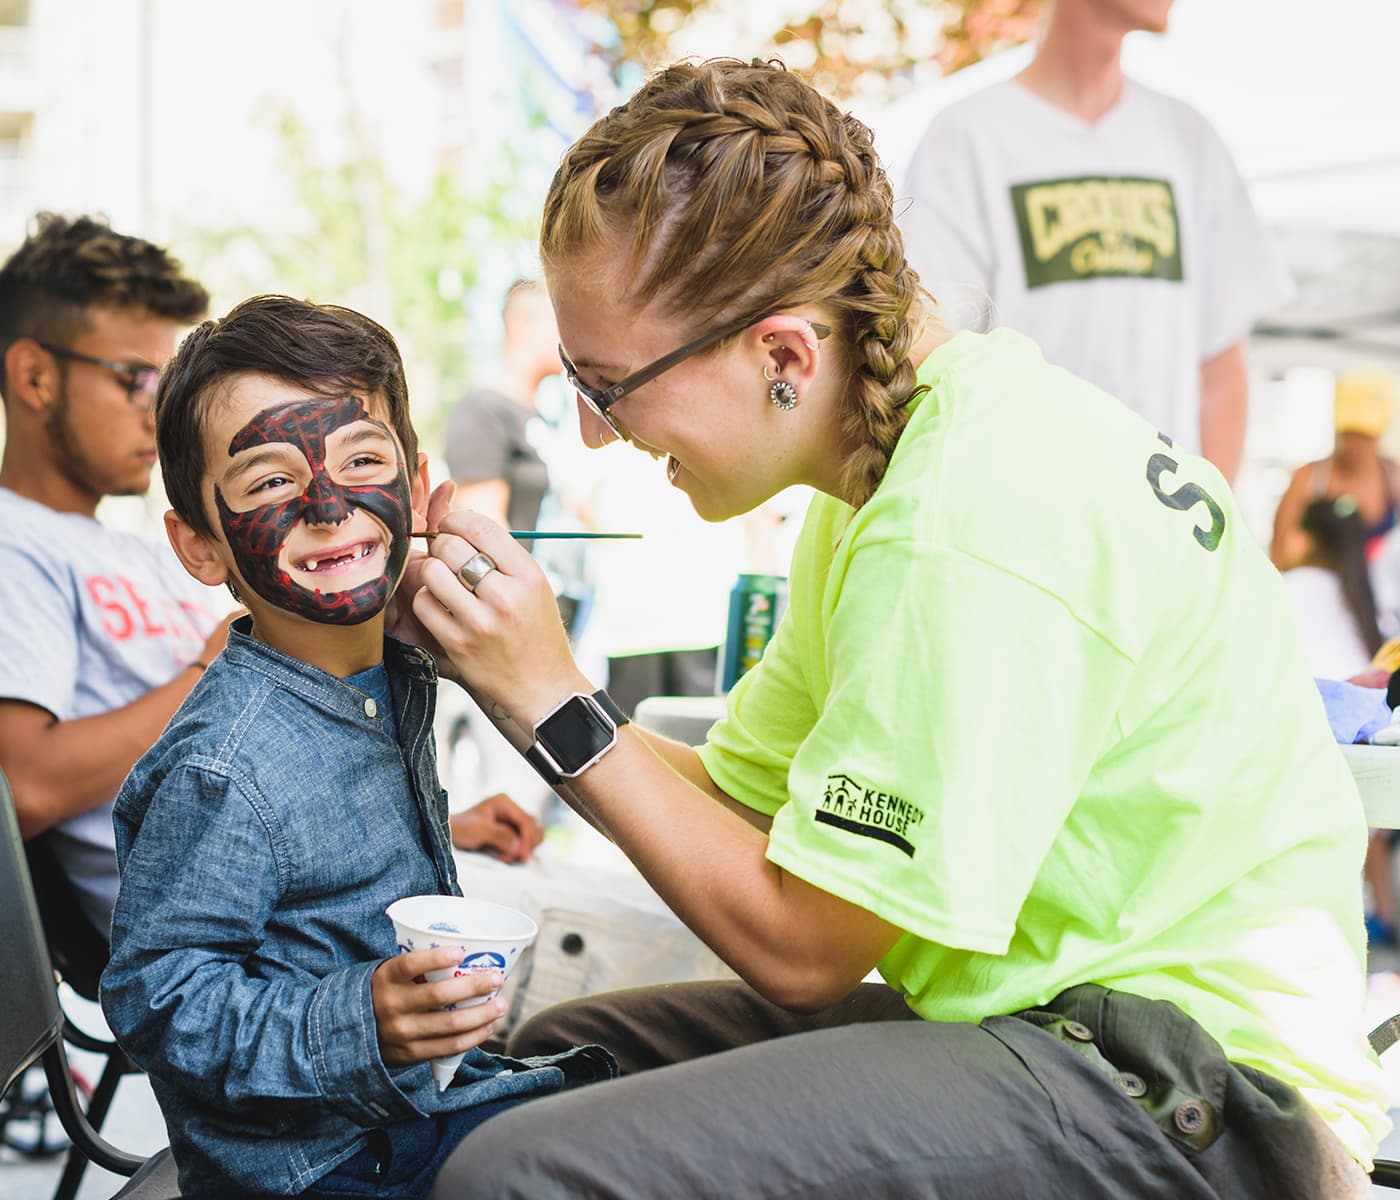 A young child getting their face painted